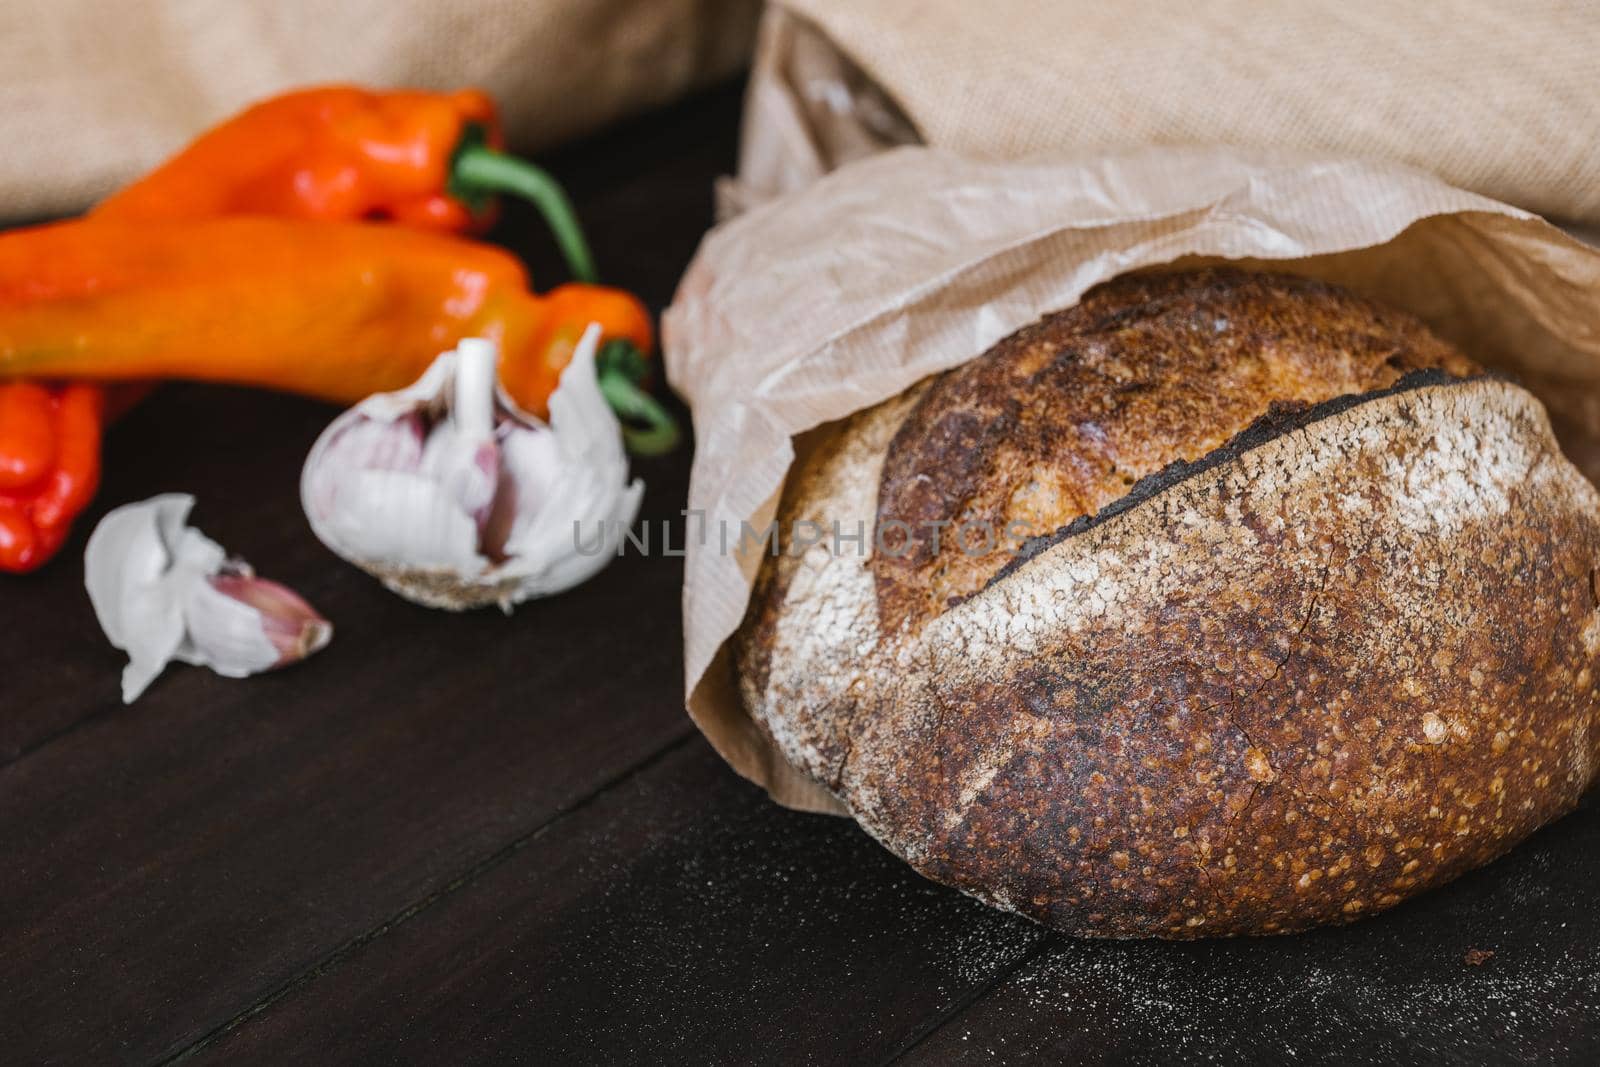 Artisan sourdough bread on wooden table with vegetables. Freshly baked round loaf of sourdough bread.